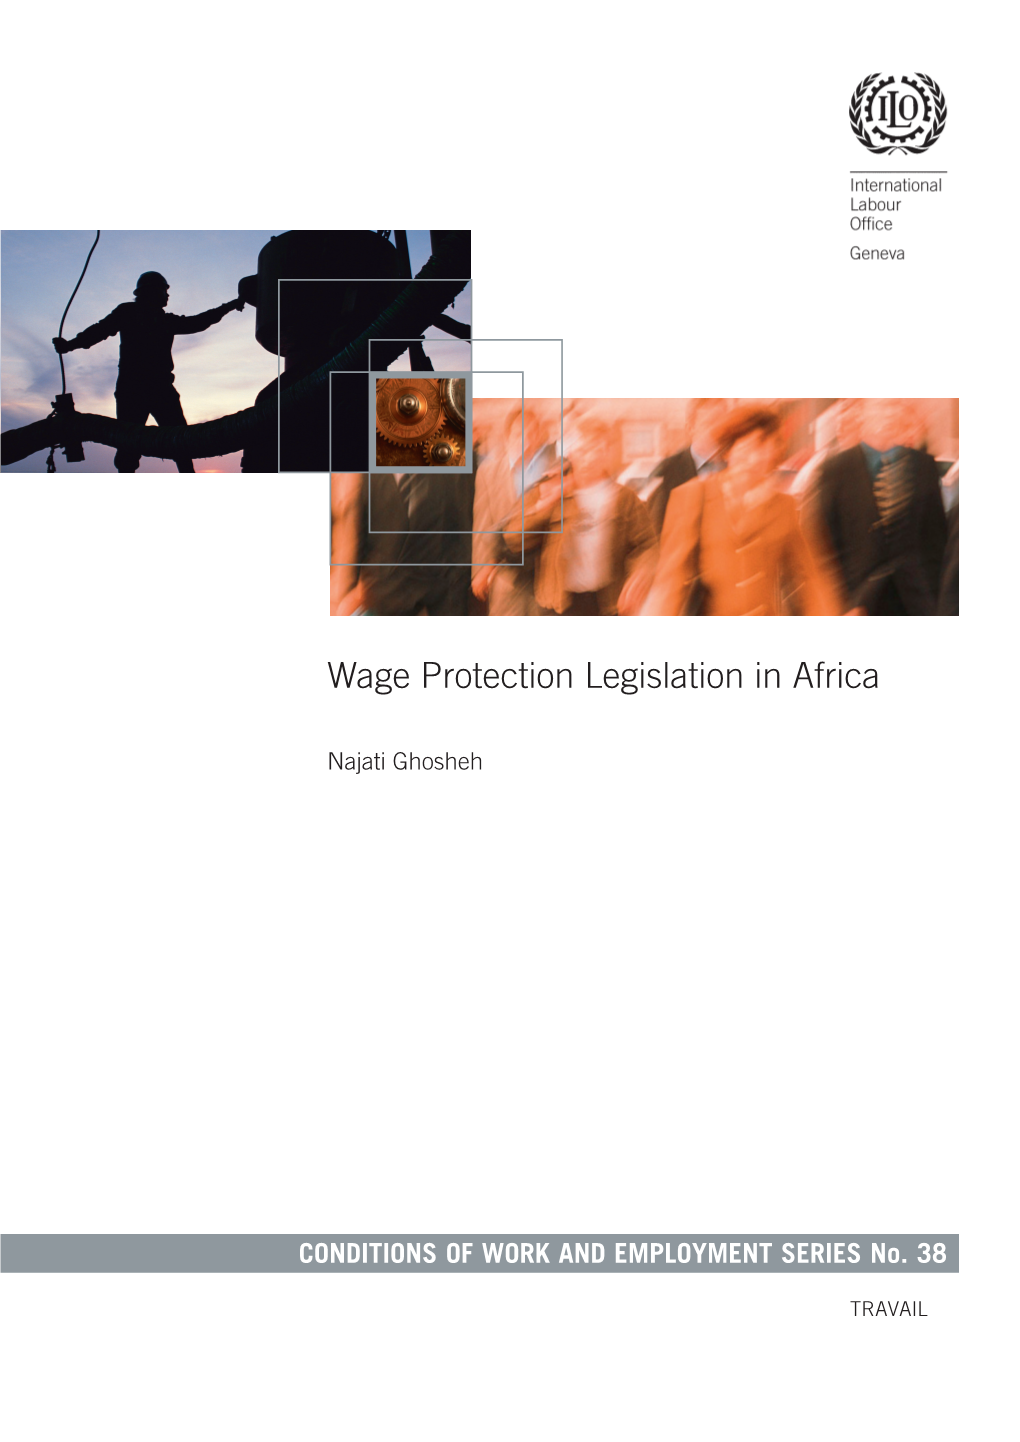 Wage Protection Legislation in Africa Conditions of Work and Employment Branch 4, Route Des Morillons CH-1211 Geneva 22 Najati Ghosheh Switzerland